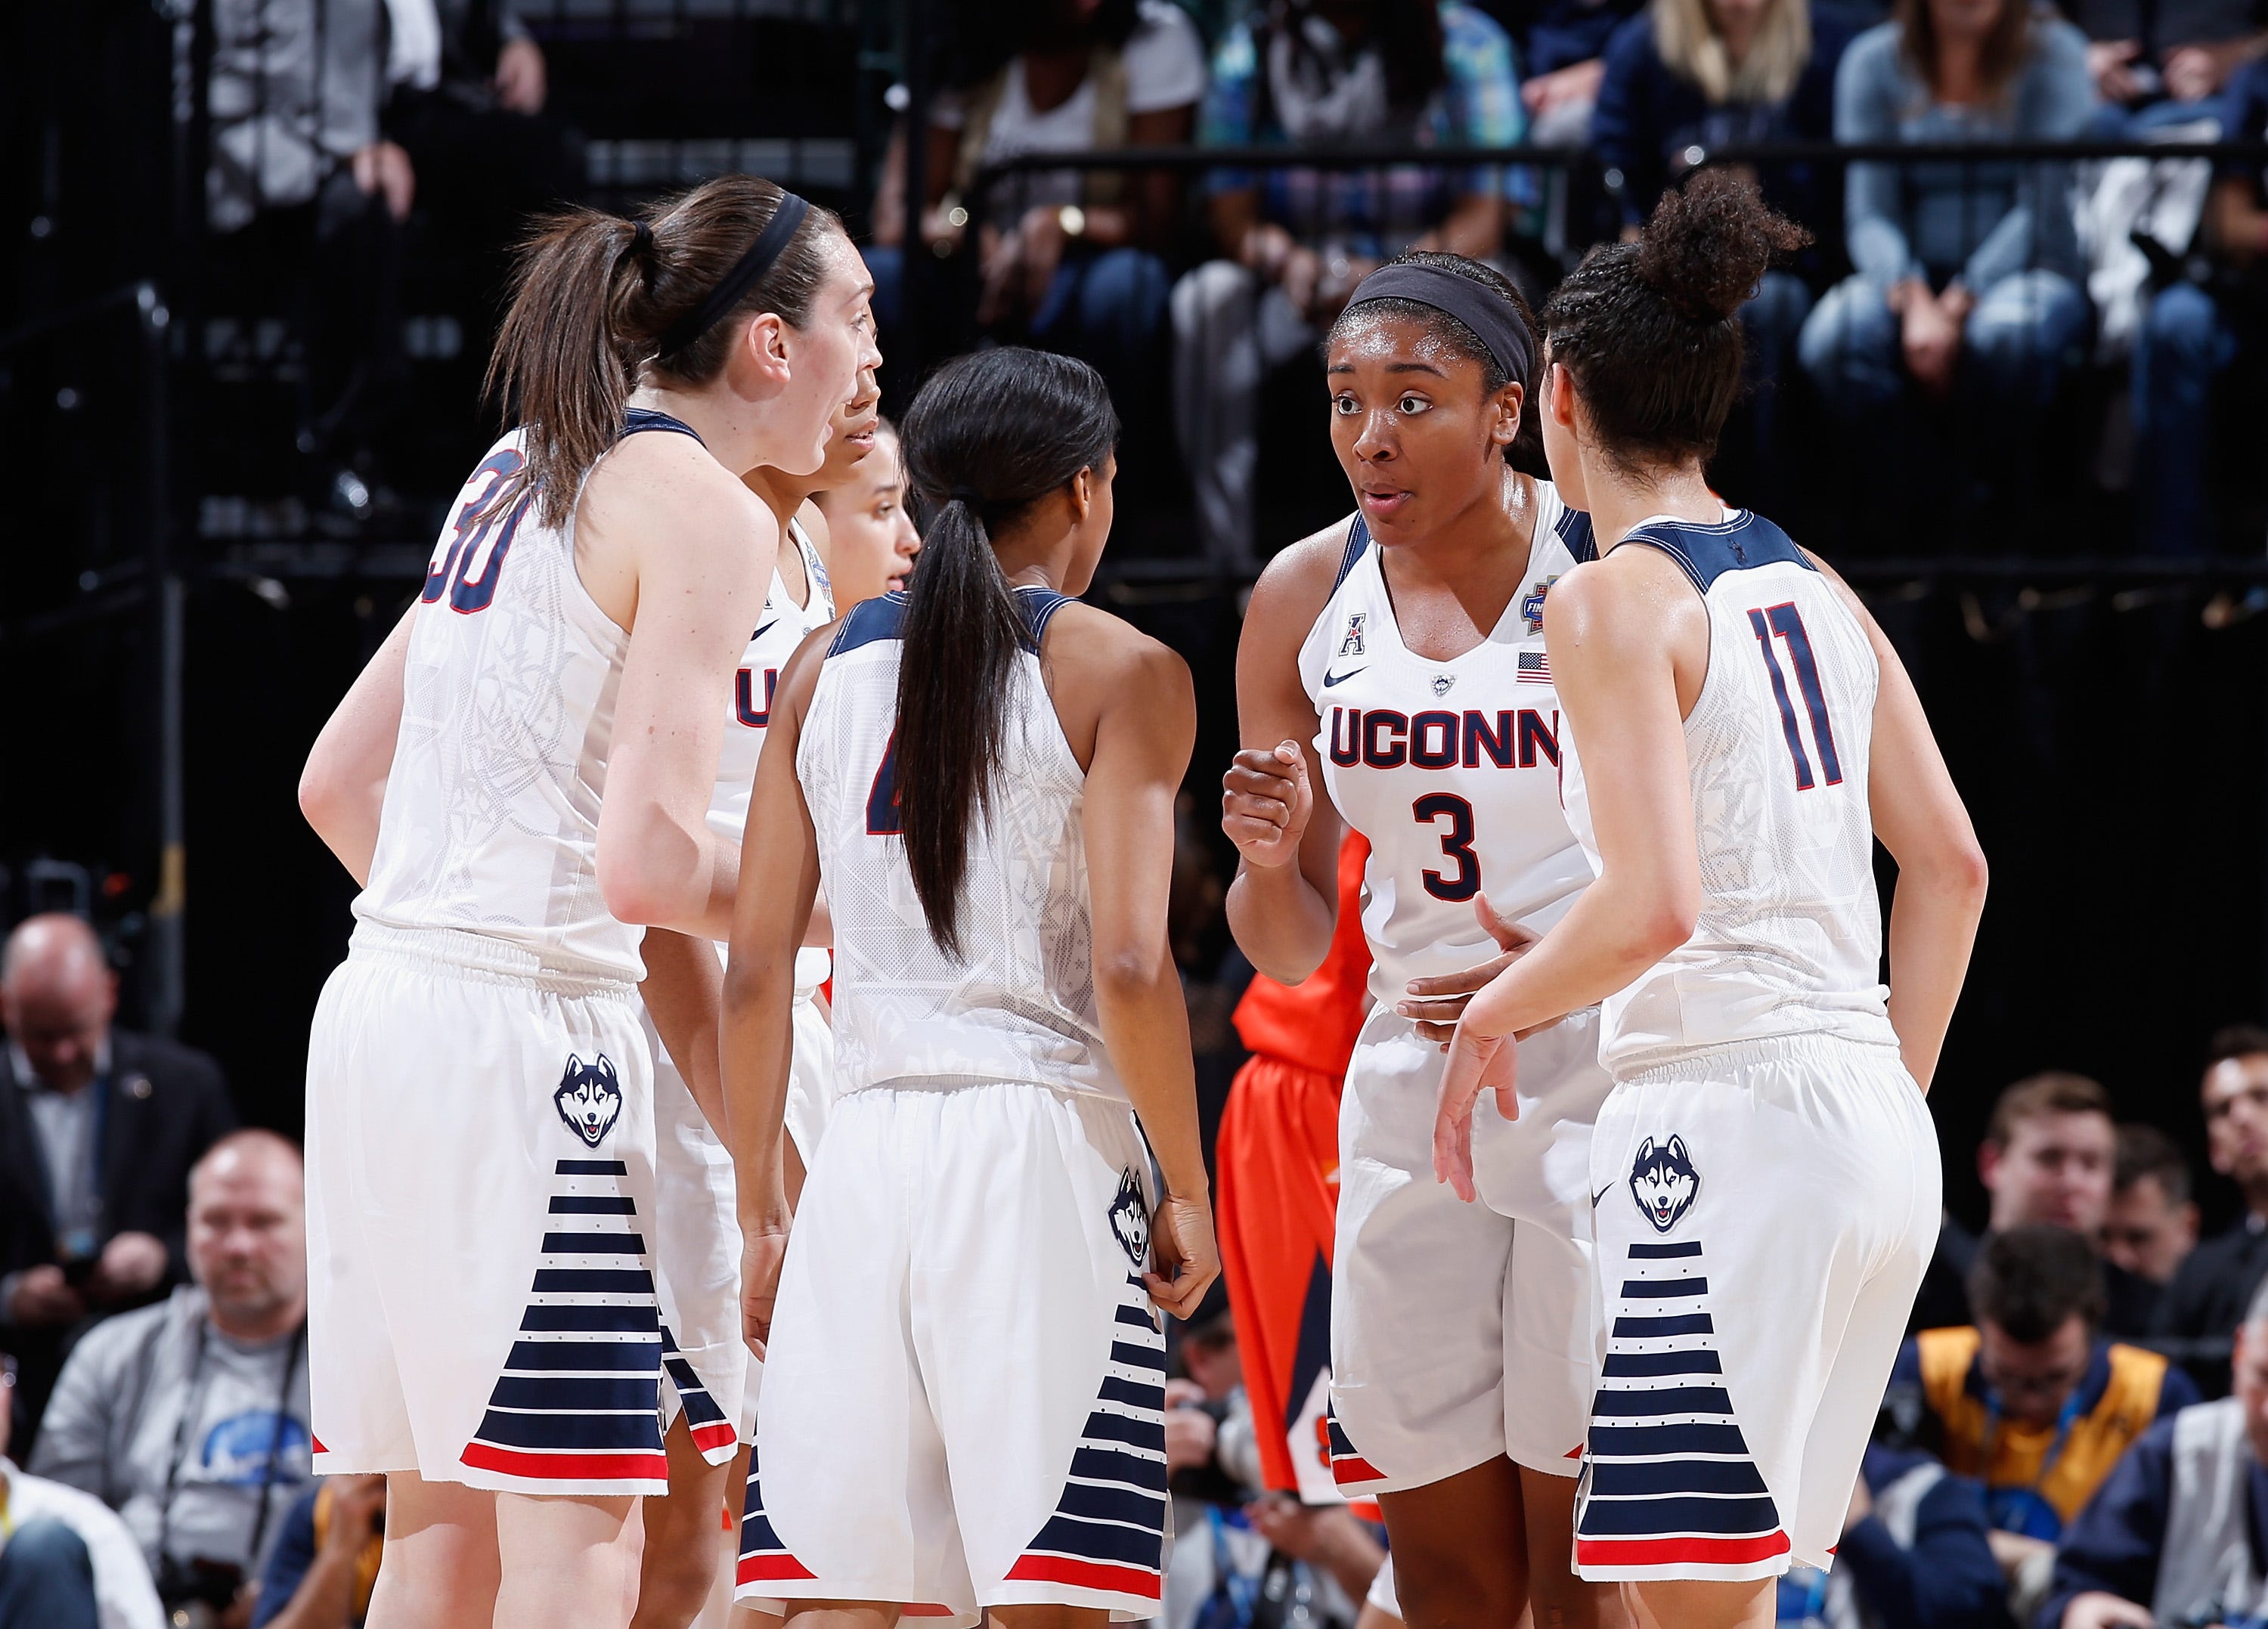 A definitive ranking of UConn's best uniforms